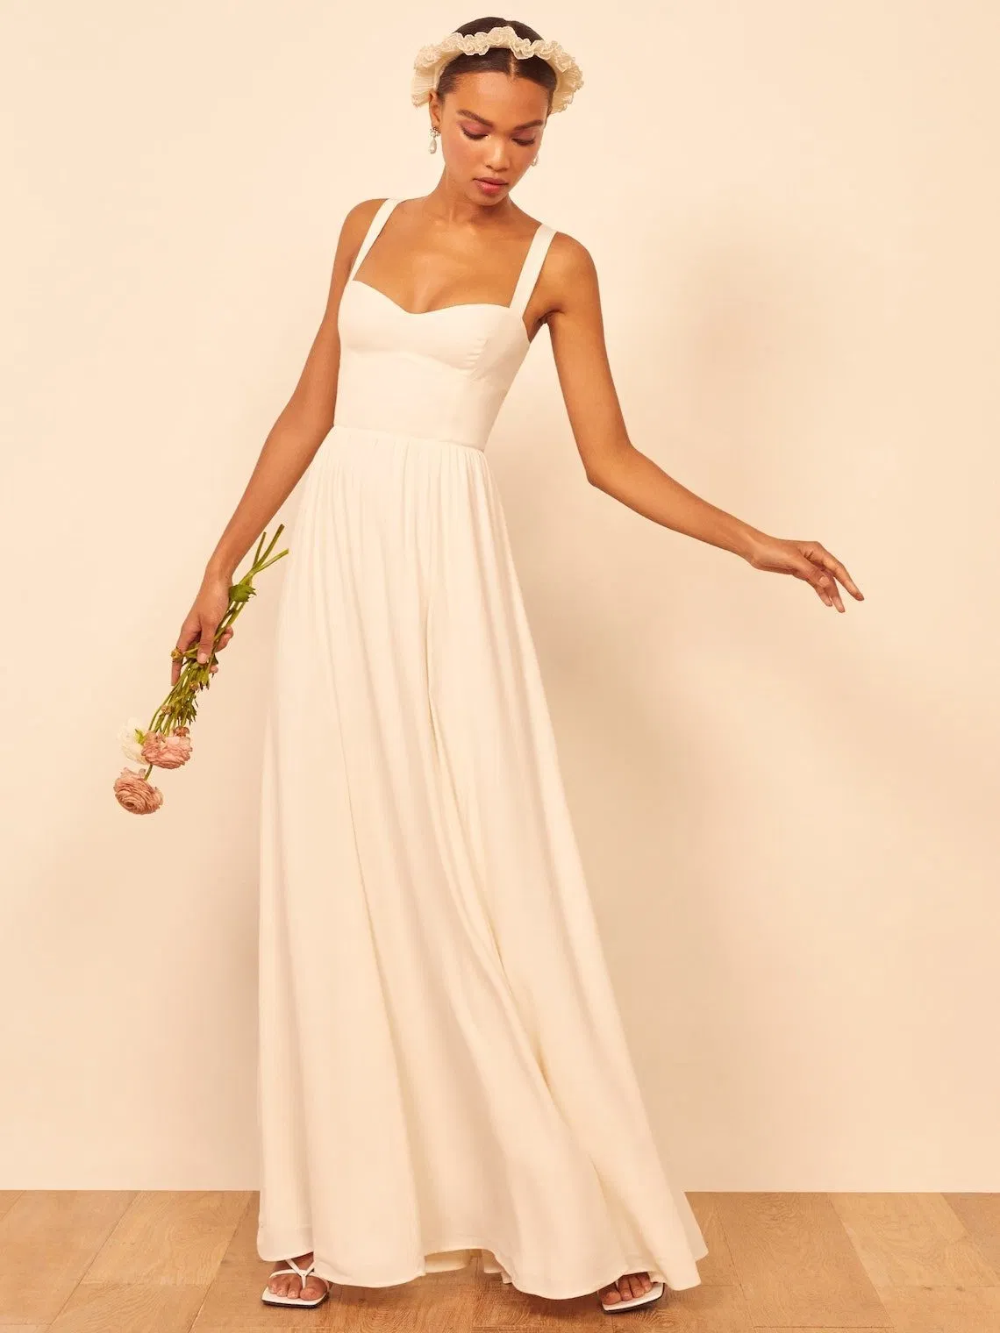 Some brief guidance for casual wedding
dresses for women